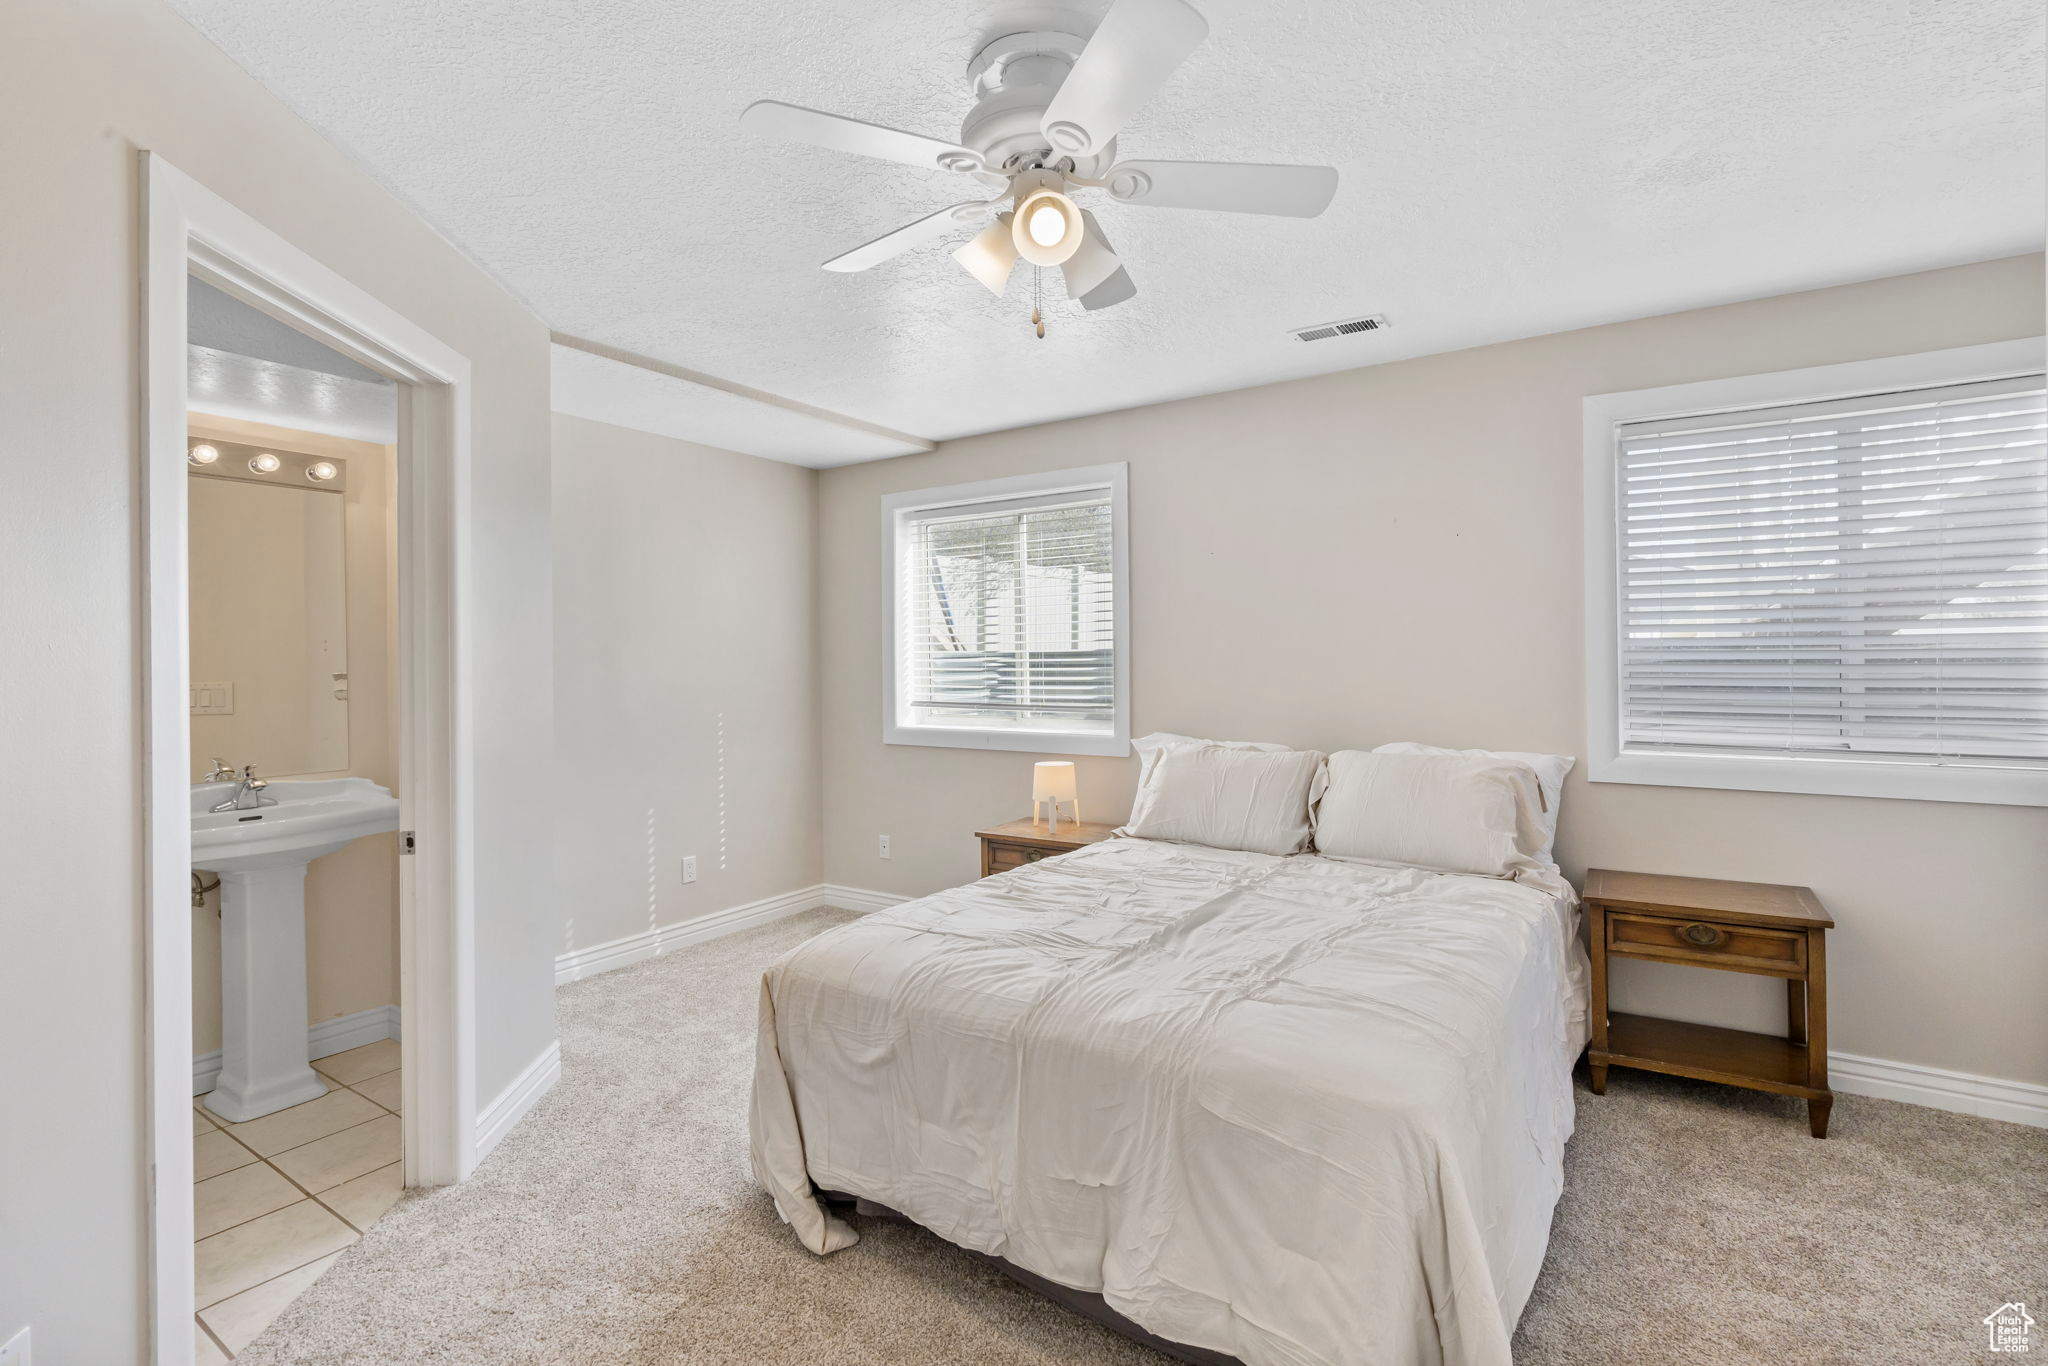 Bedroom with light colored carpet, a textured ceiling, ceiling fan, and ensuite bathroom